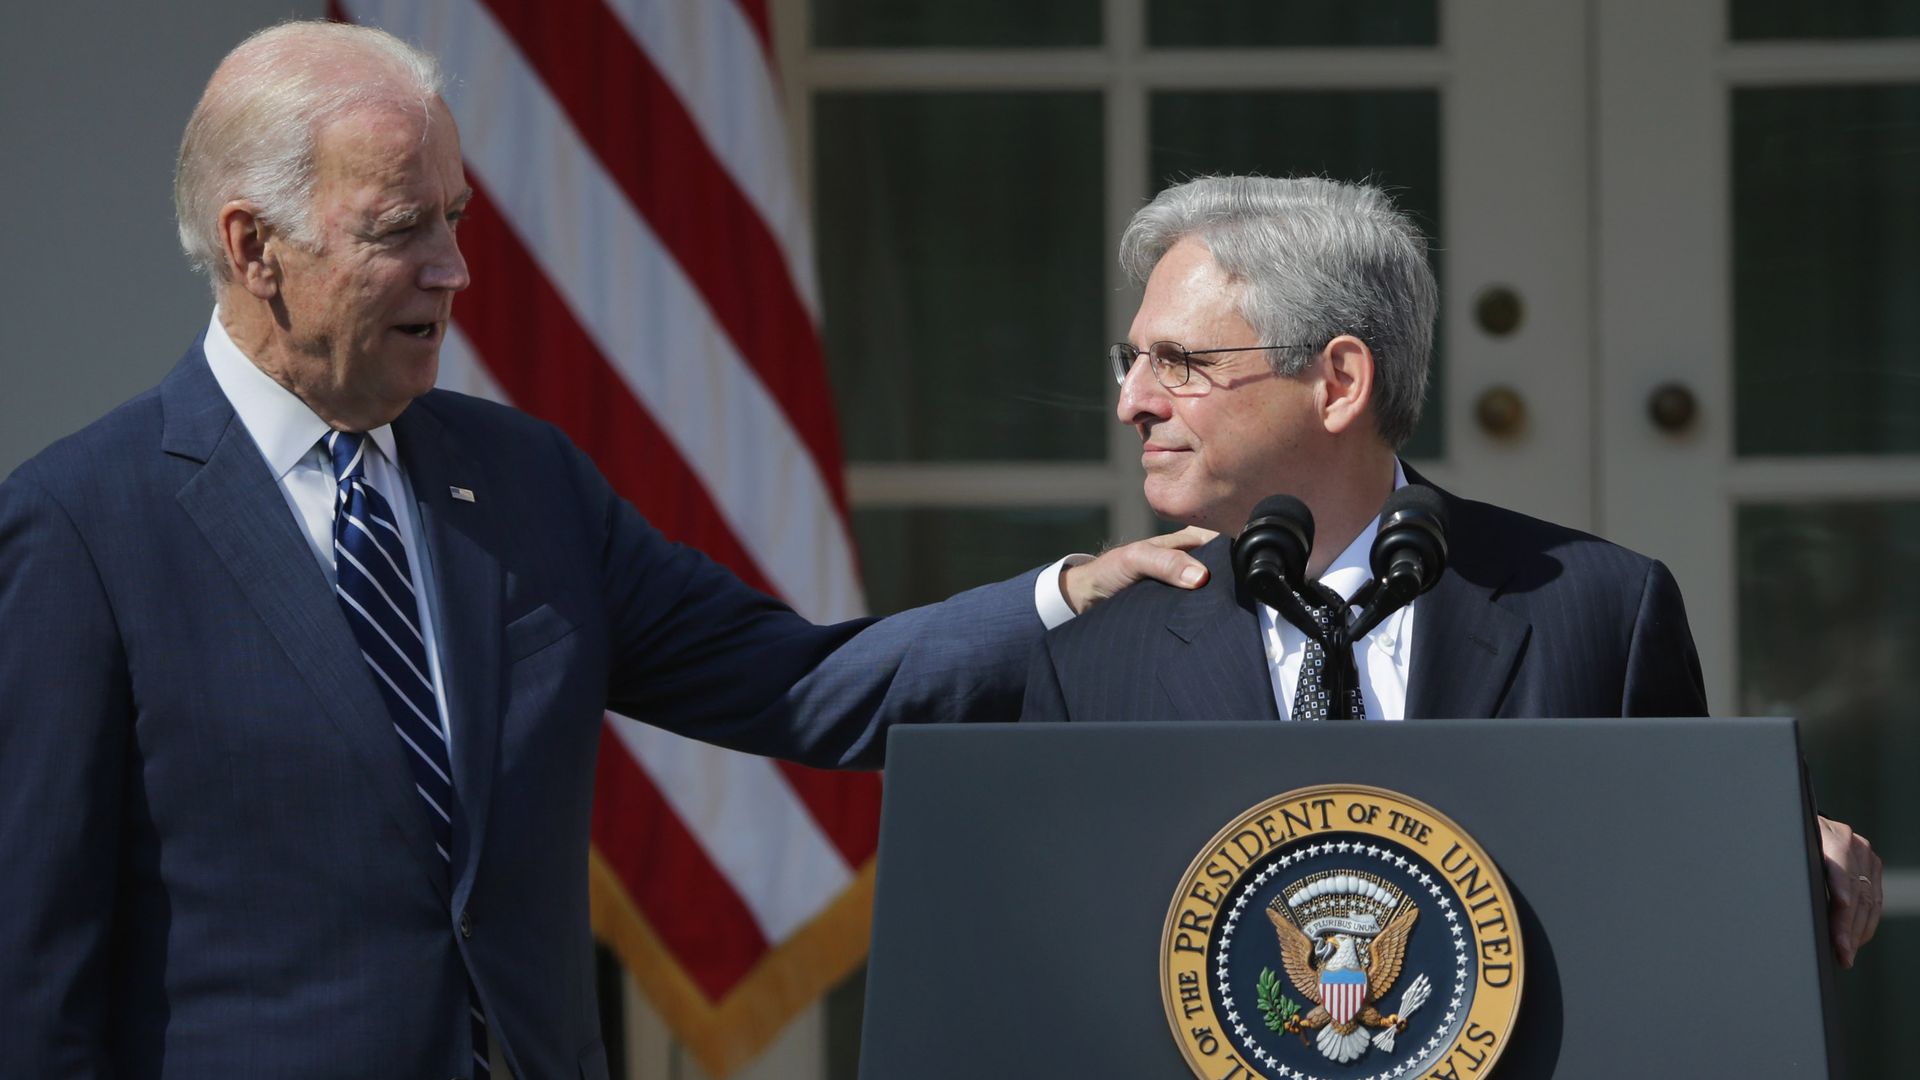 Joe Biden touches Merrick Garland on the shoulder after President Obama nominated him to the Supreme Court in 2016.